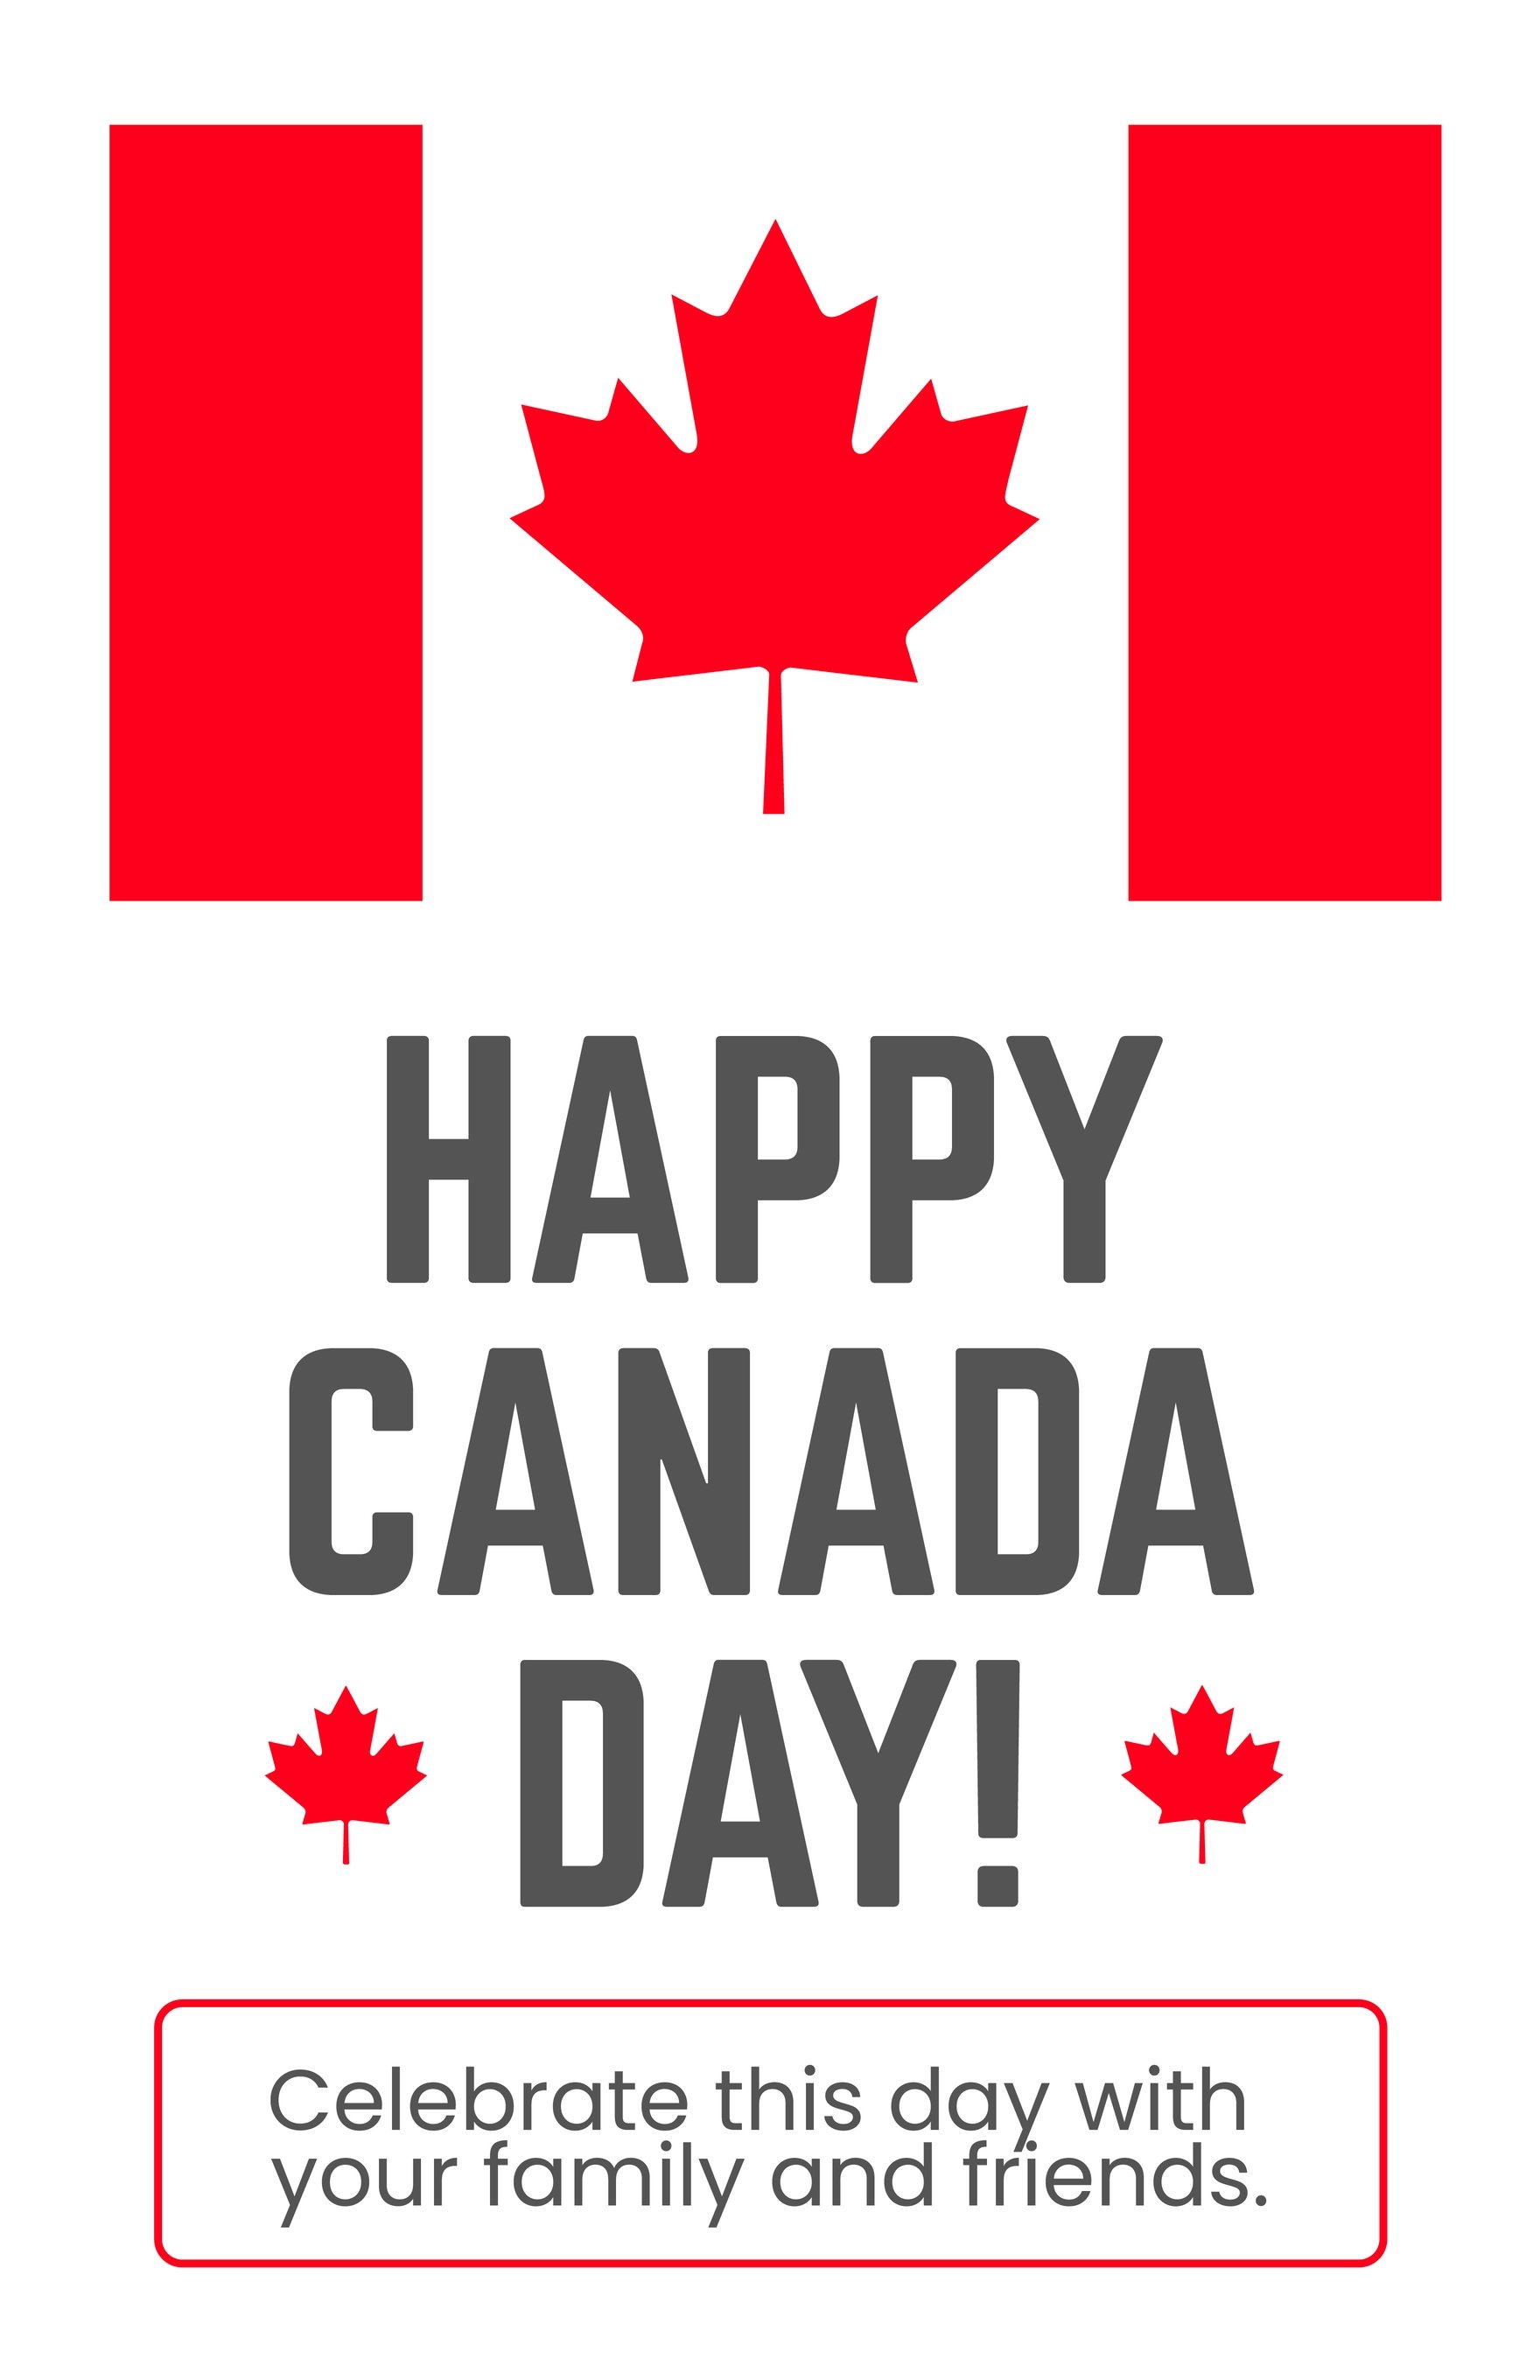 Canada Day Flag Poster in Word, Google Docs, Illustrator, PSD, Publisher